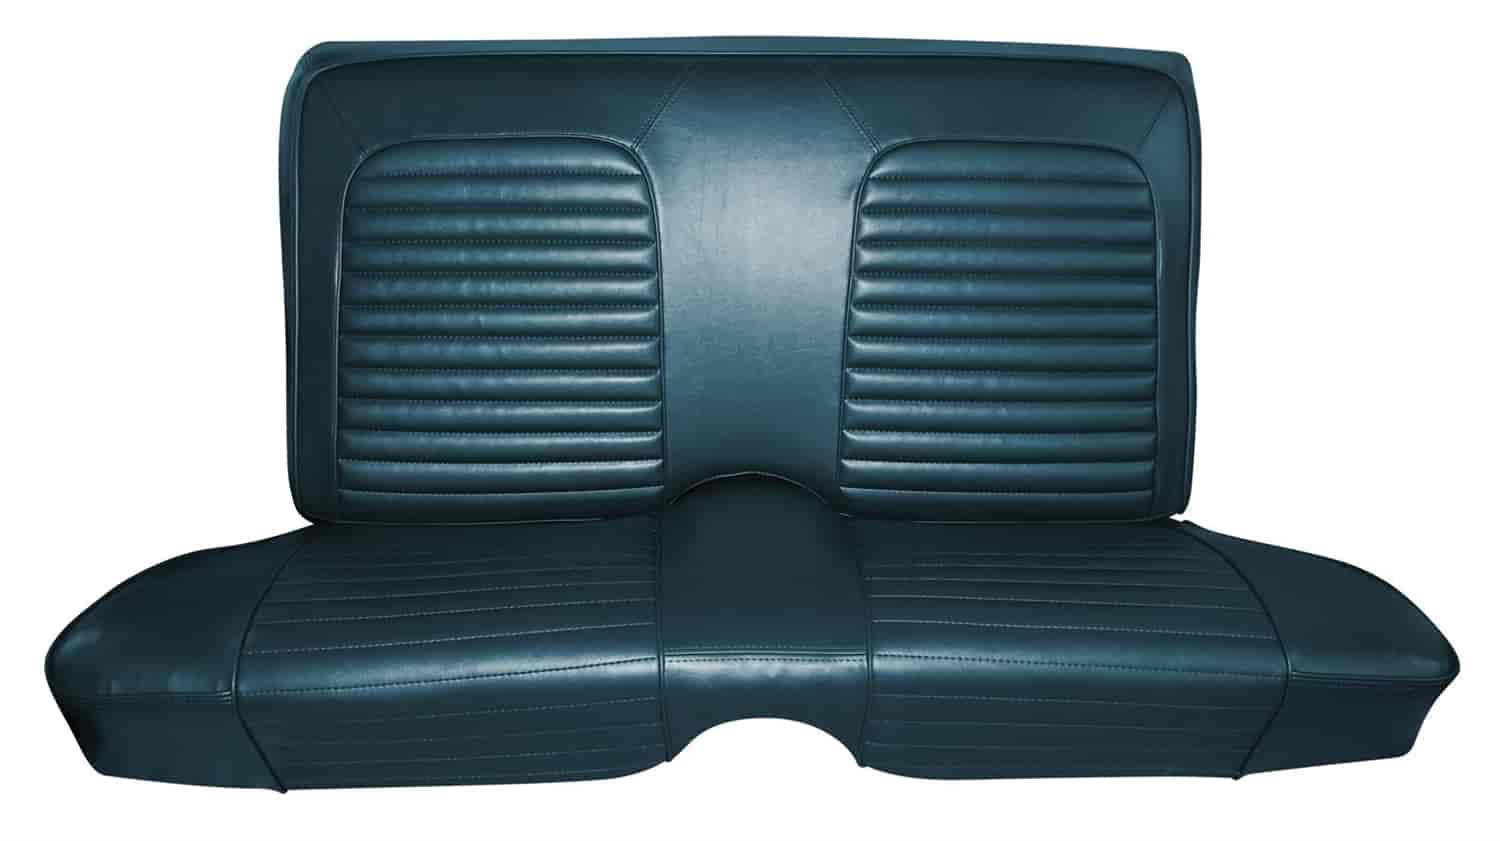 1964 Ford Falcon Futura Convertible Interior Front Bucket and Rear Bench Seat Upholstery Set